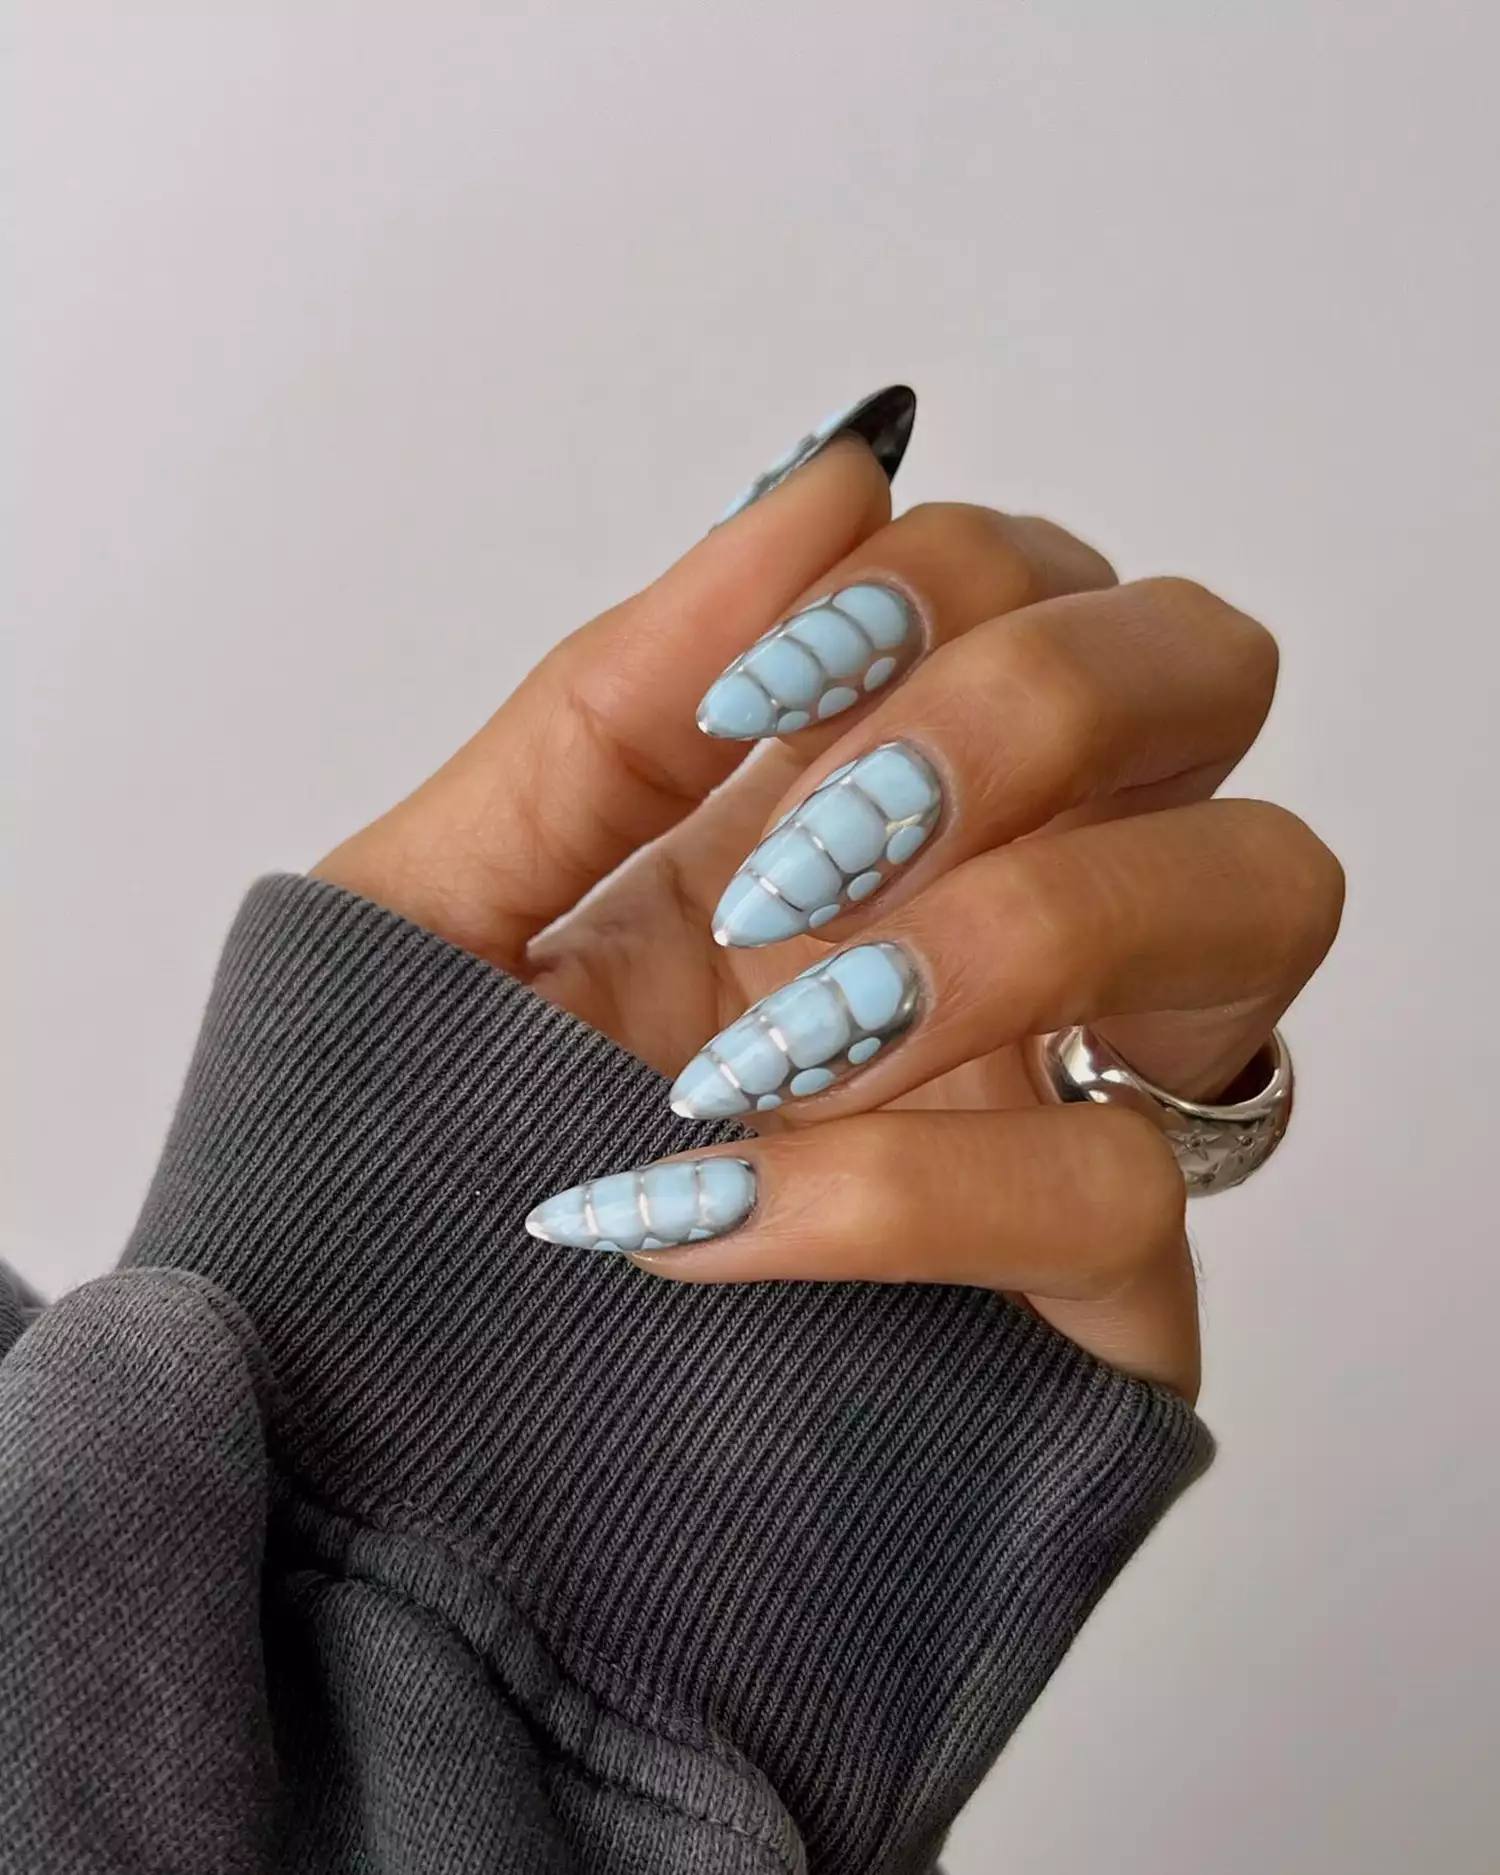 Textured nail design by @overglowedit.